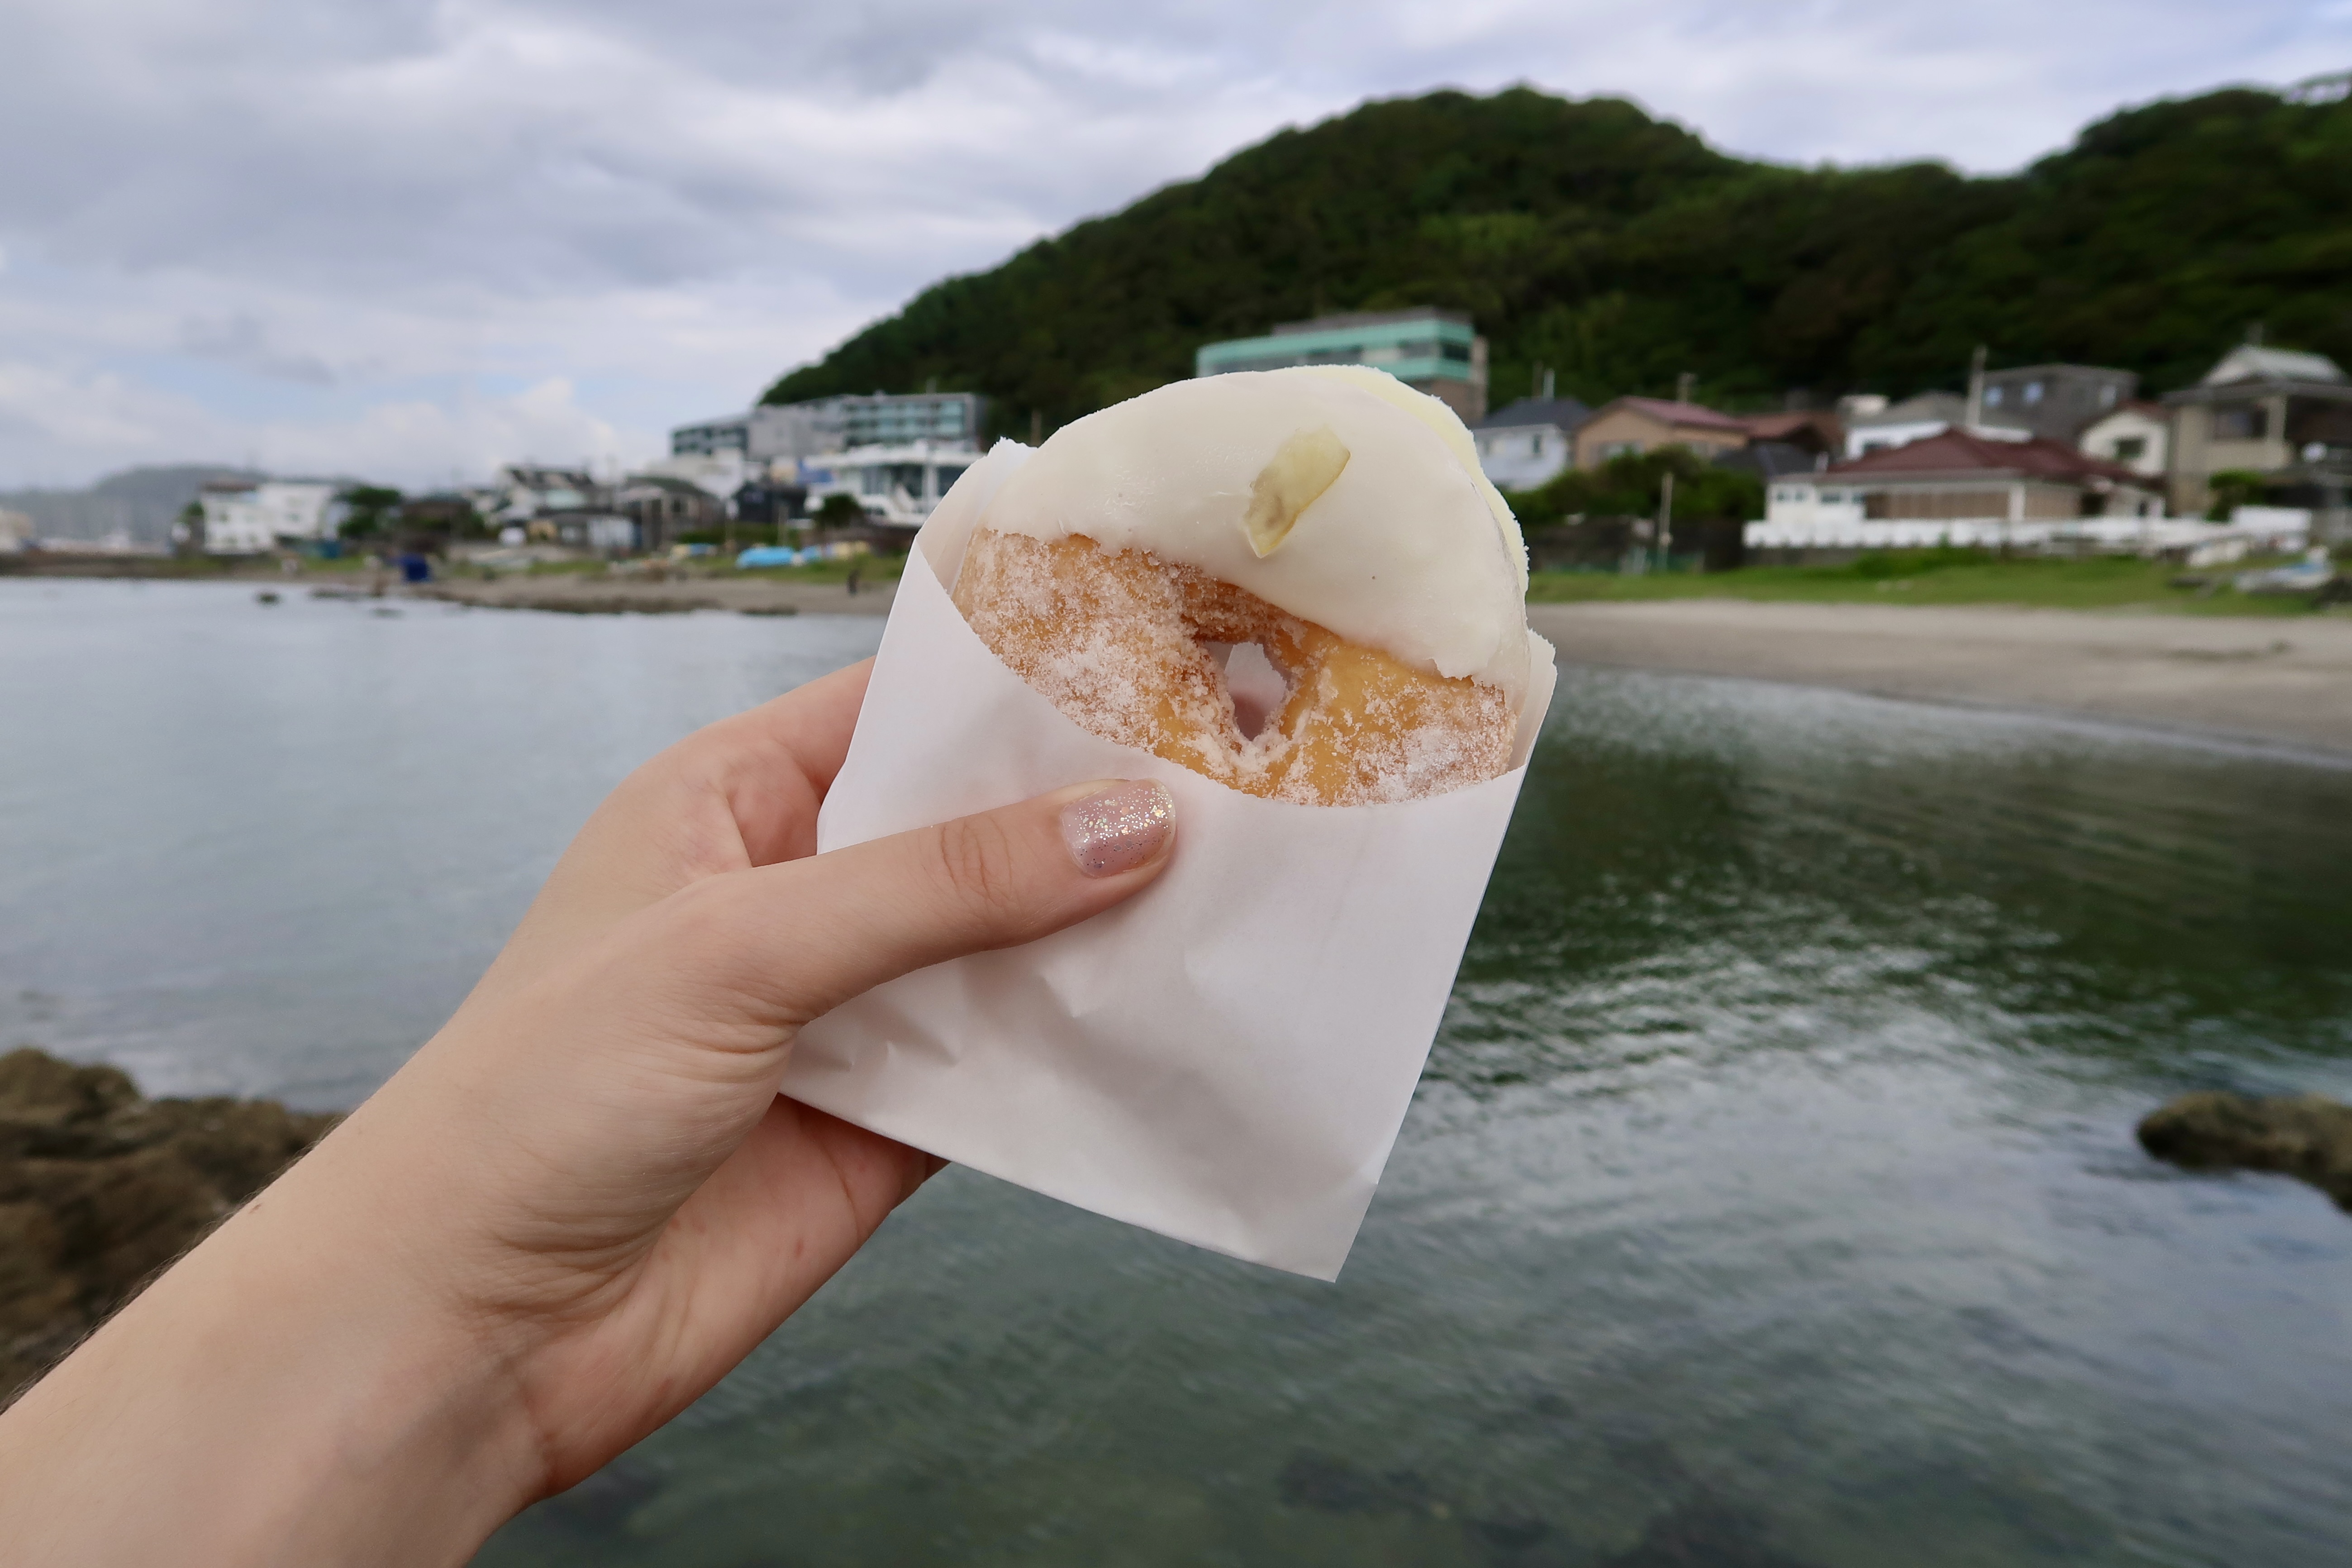 A perfect treat to eat by the beach